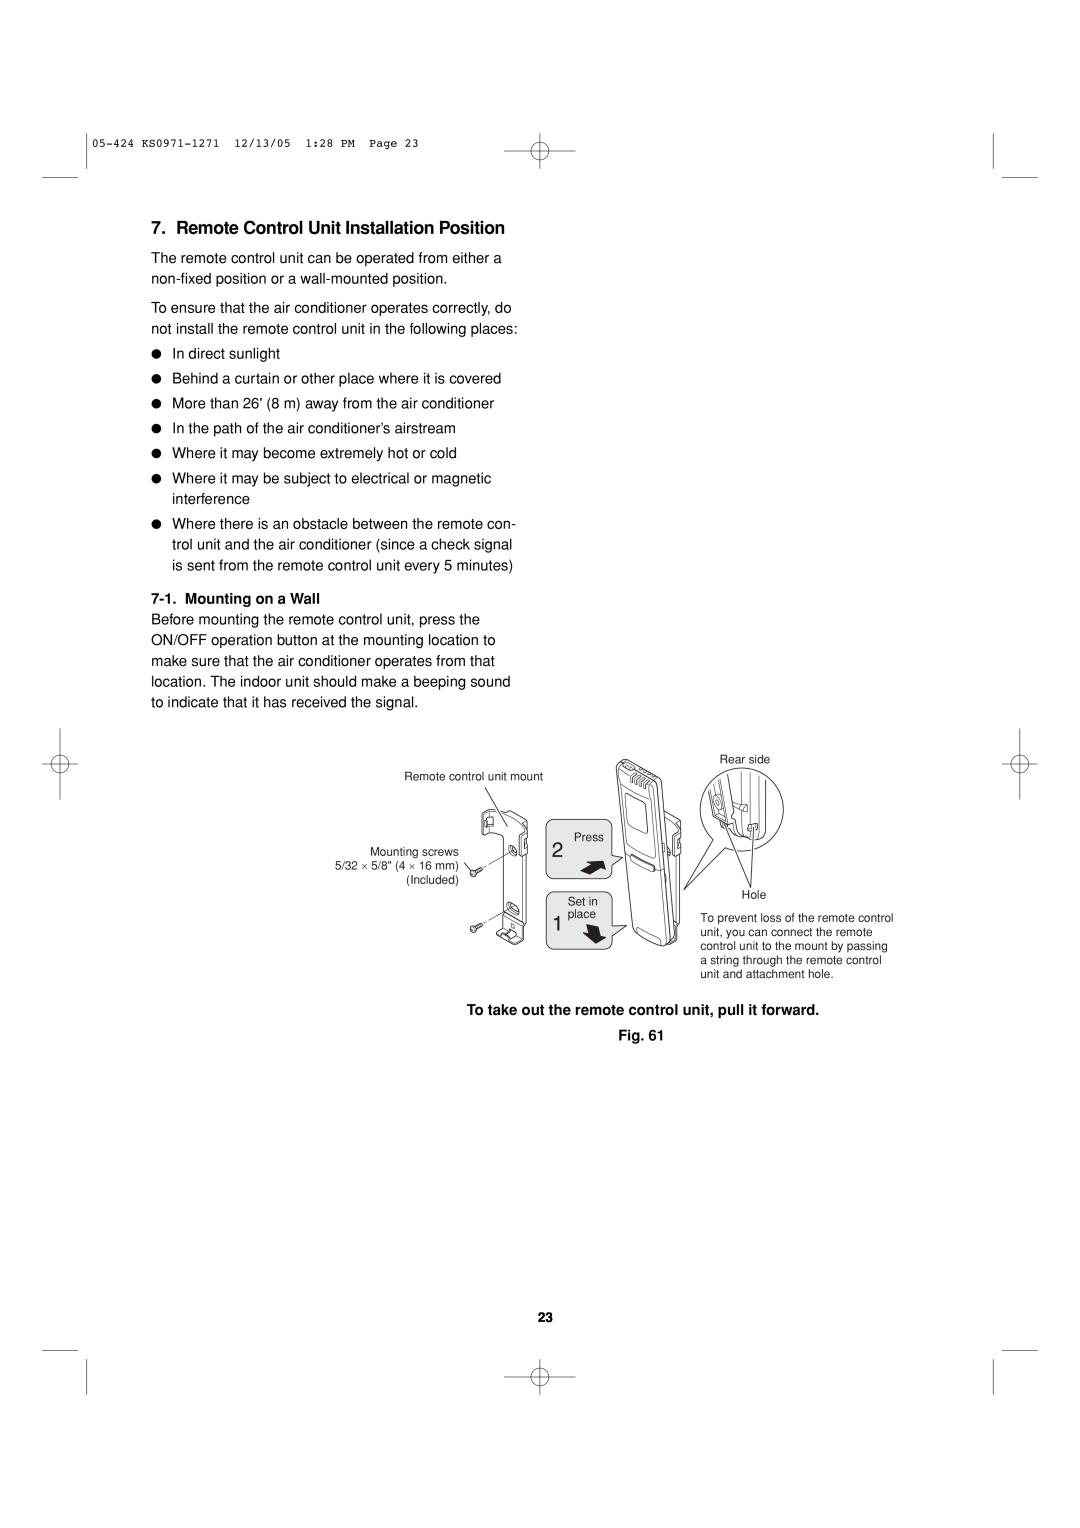 Sanyo Cool/Dry installation instructions Remote Control Unit Installation Position, Mounting on a Wall 